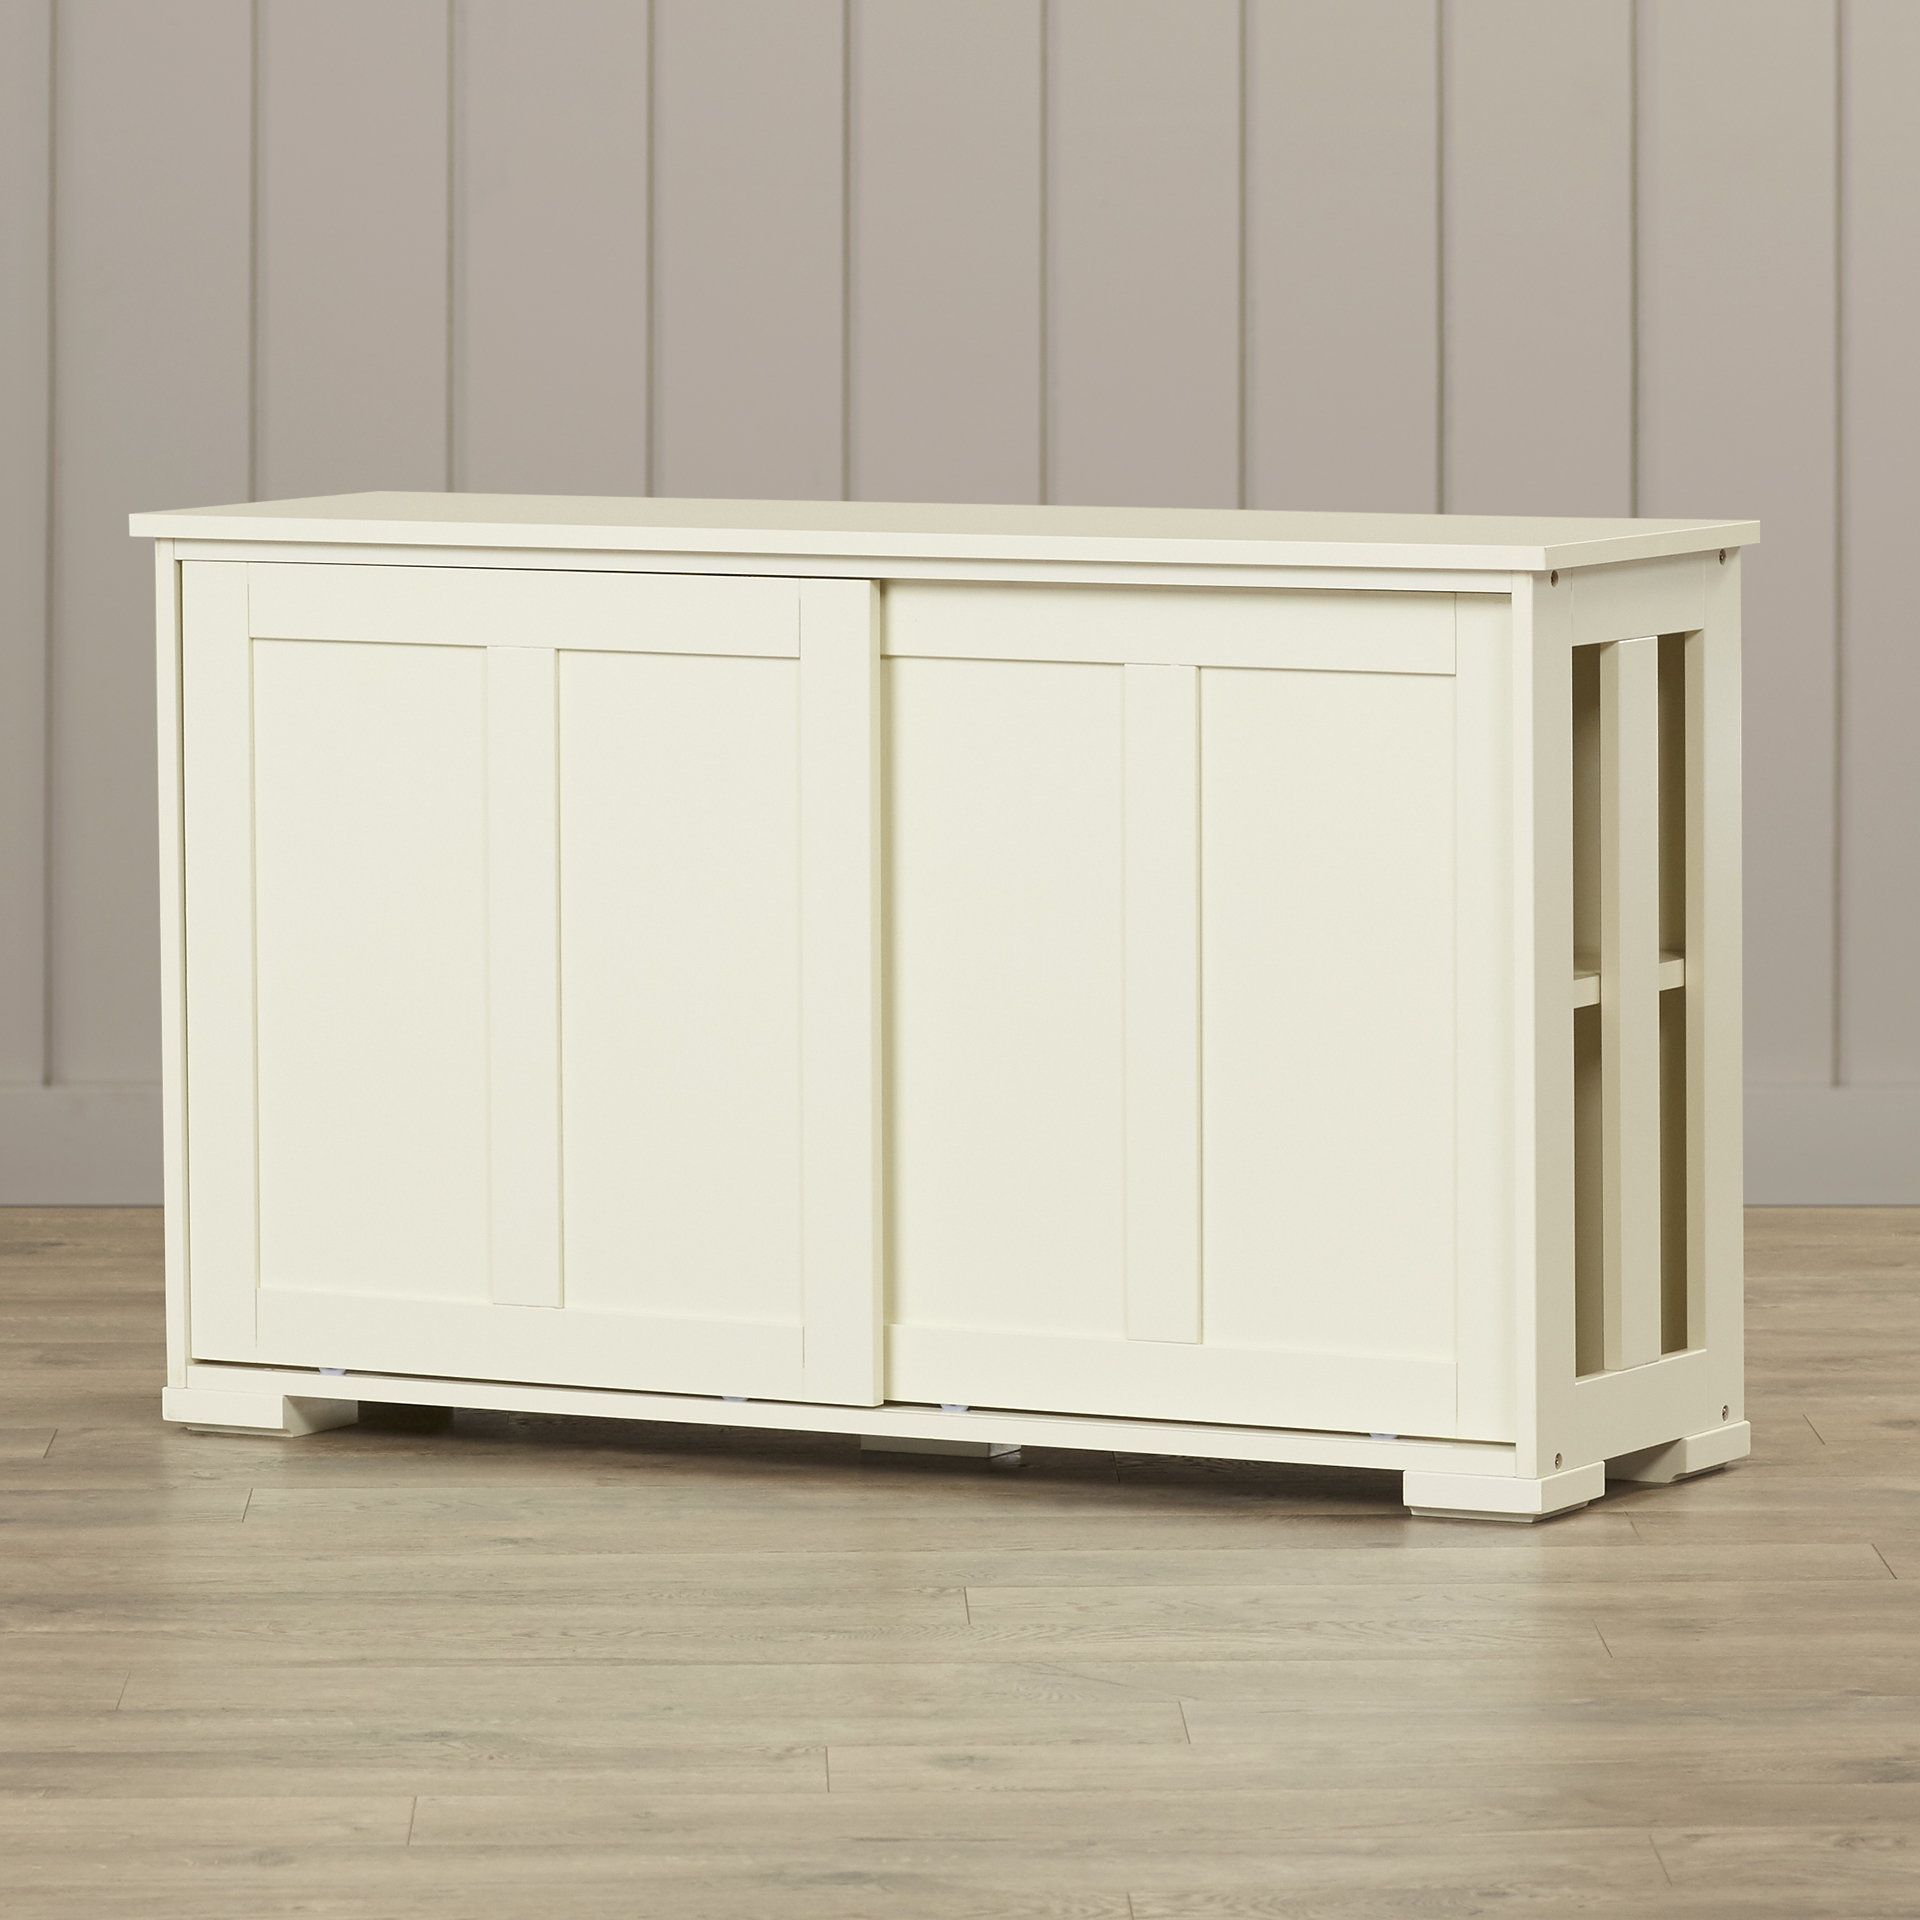 Coastal Sideboards & Buffets | Birch Lane In Amityville Sideboards (View 28 of 30)